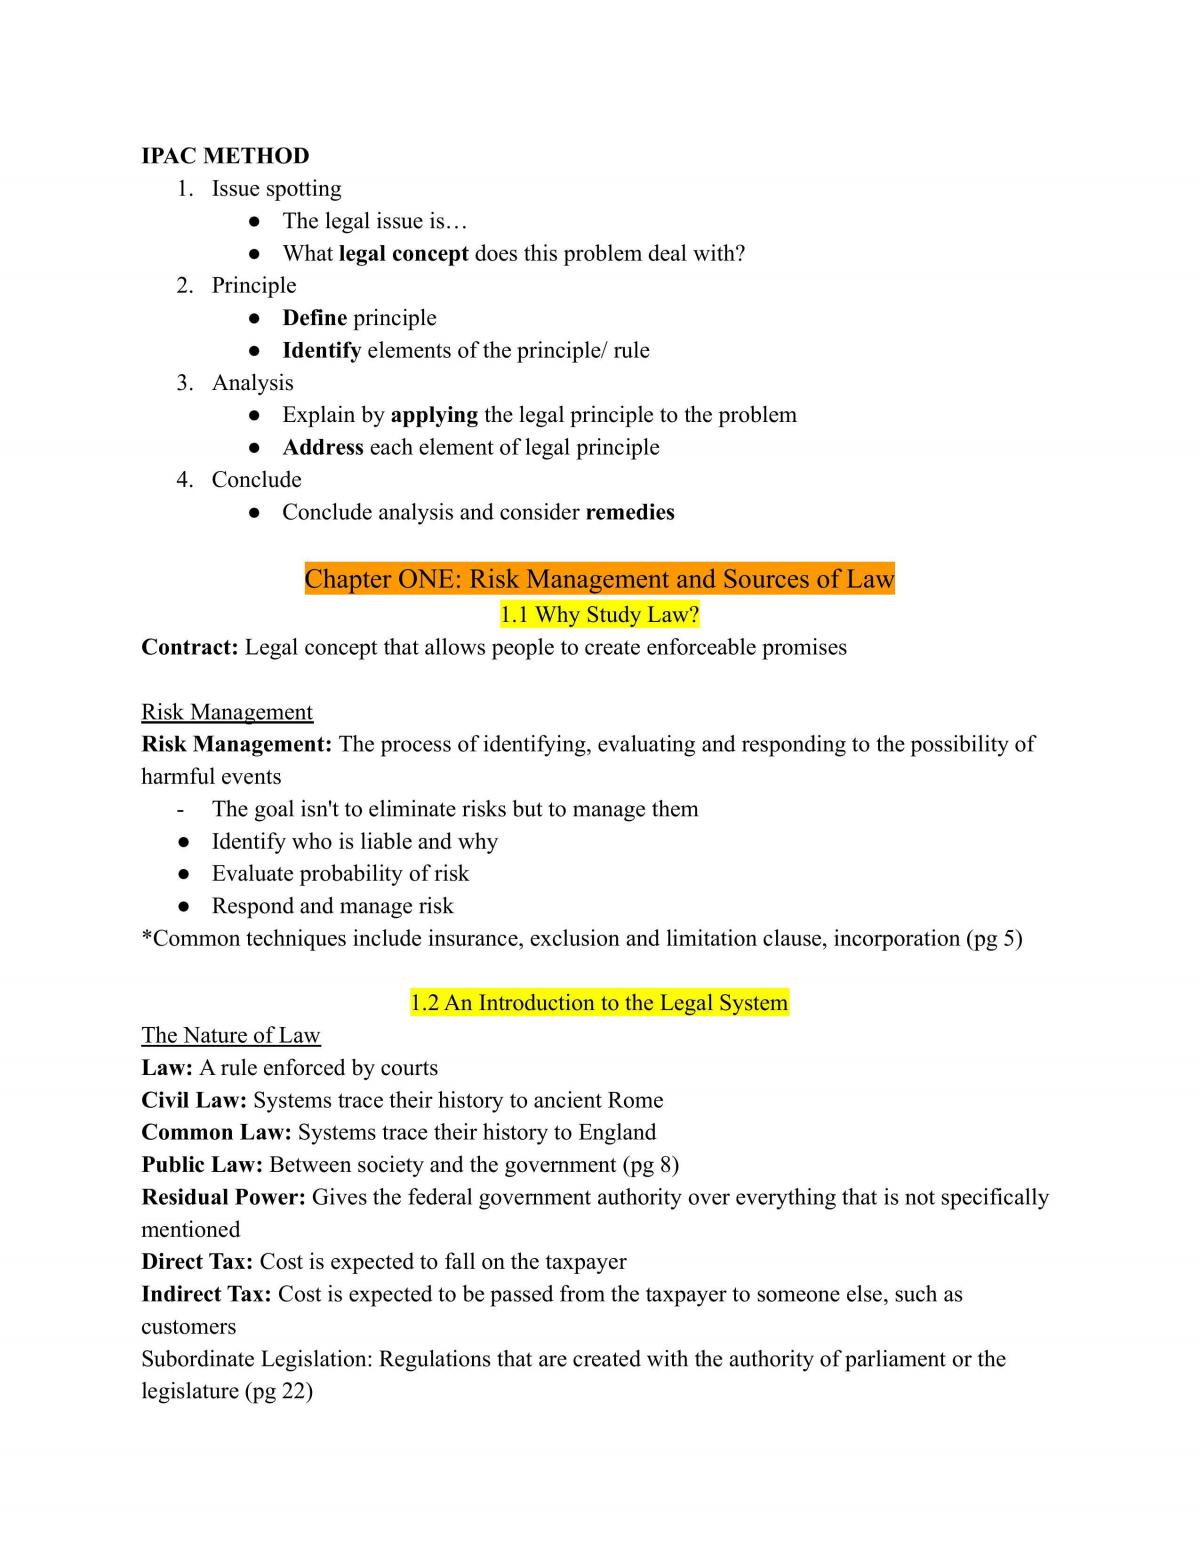 LAW 122 Exam Review - Page 1